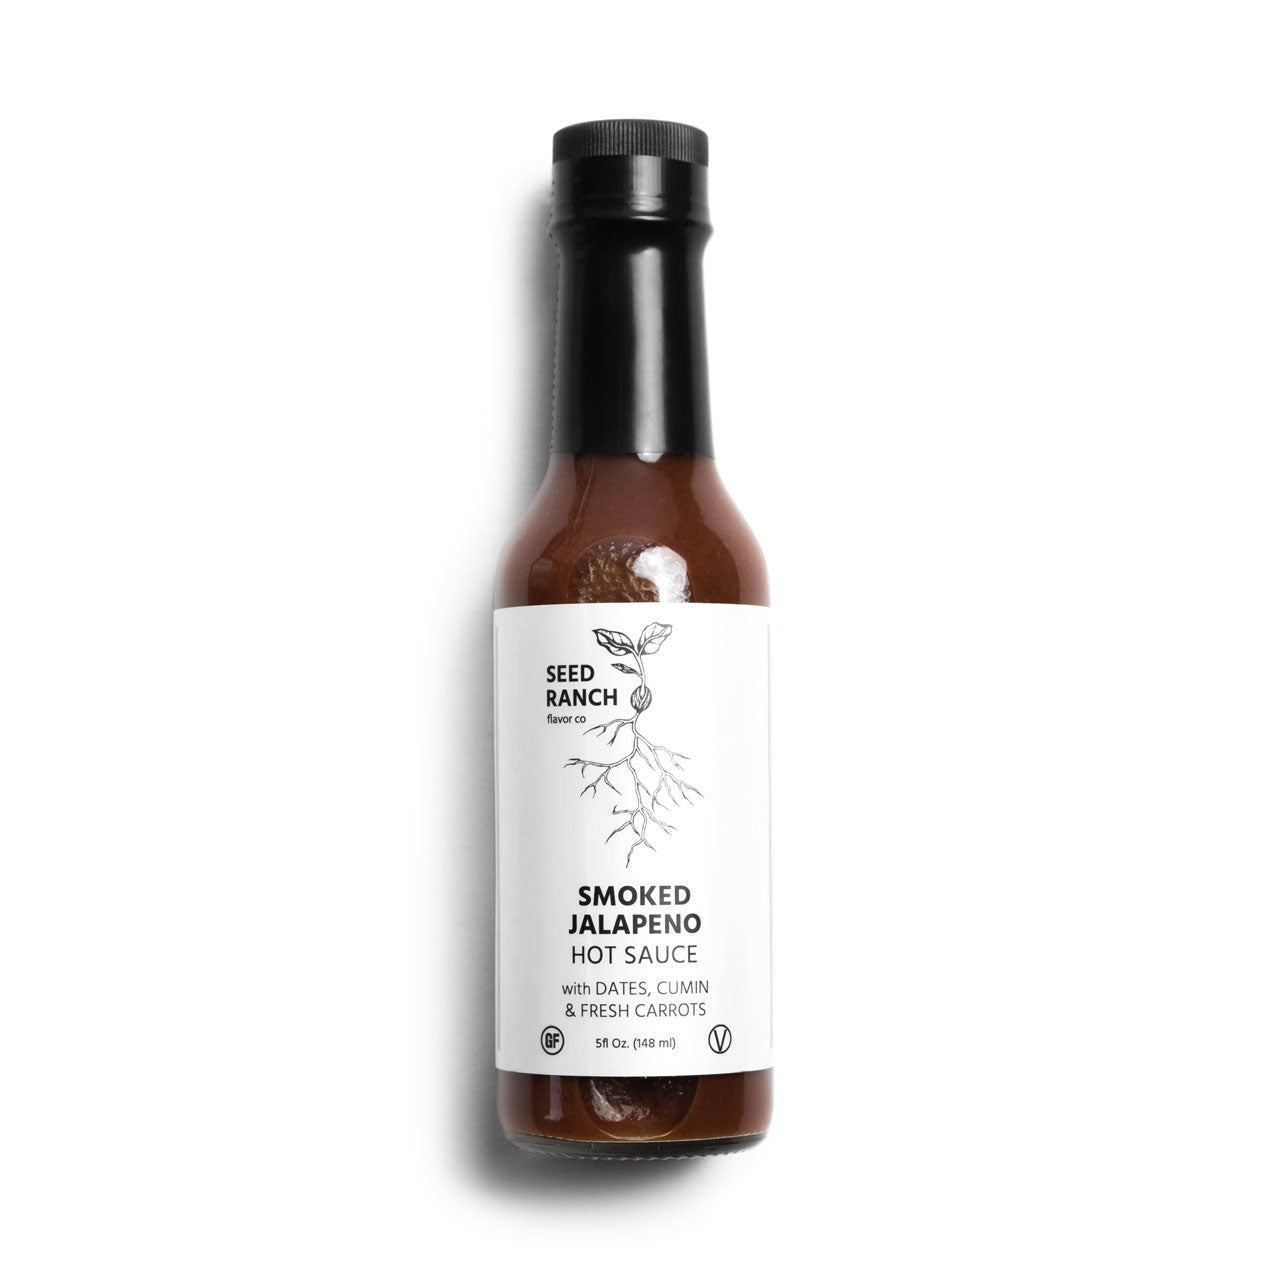 Seed Ranch Hot Sauce